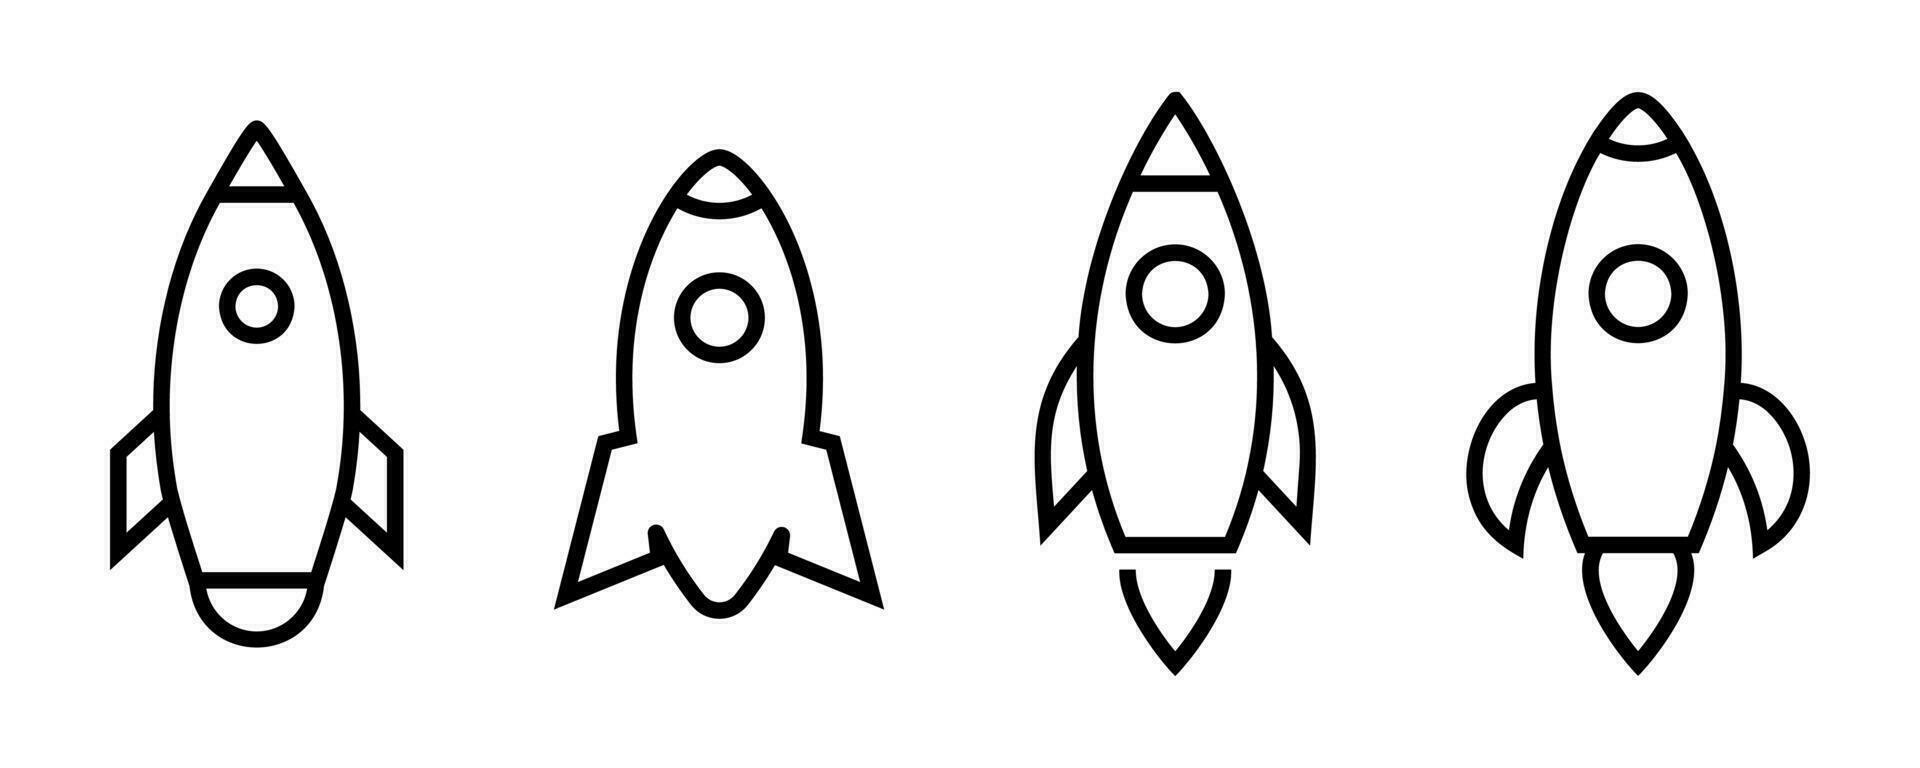 Outline rocket icons set. Linear spaceship symbol. Outline black rocket icon. Startup symbol. Transparent spacecraft sign. Spaceship silhouette. Startup illustration. Linear shuttle icon in black. vector